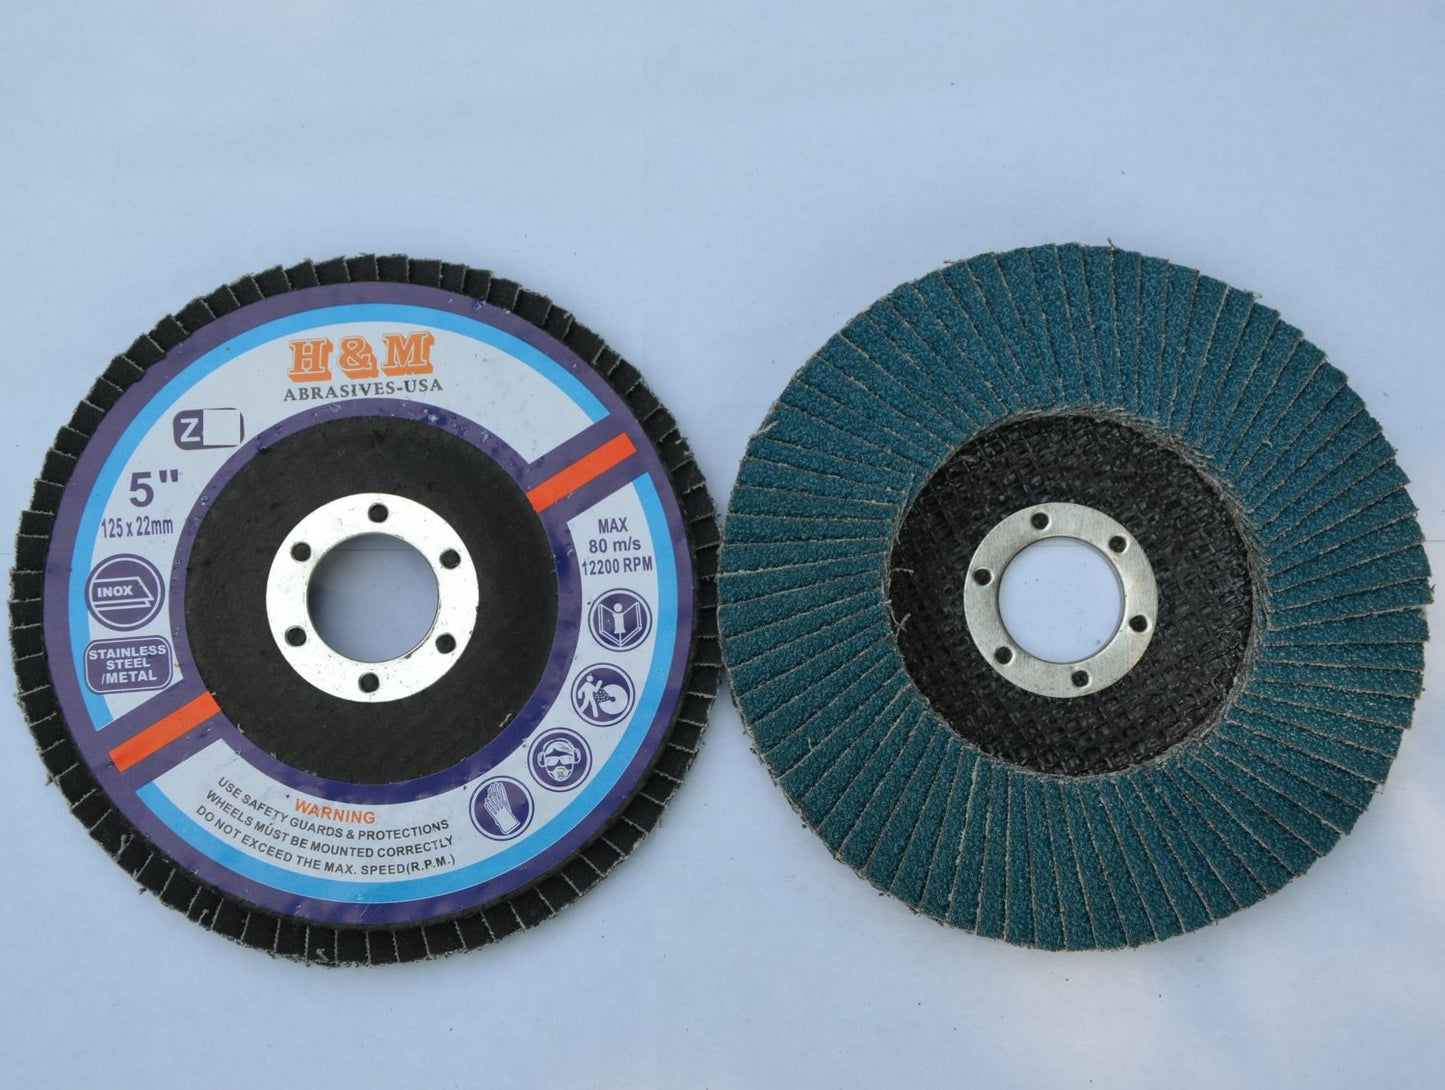 5" inch 5" x 7/8" FLAP DISCS in 40 60 80 120 Grit for Stainless Steel & Metal